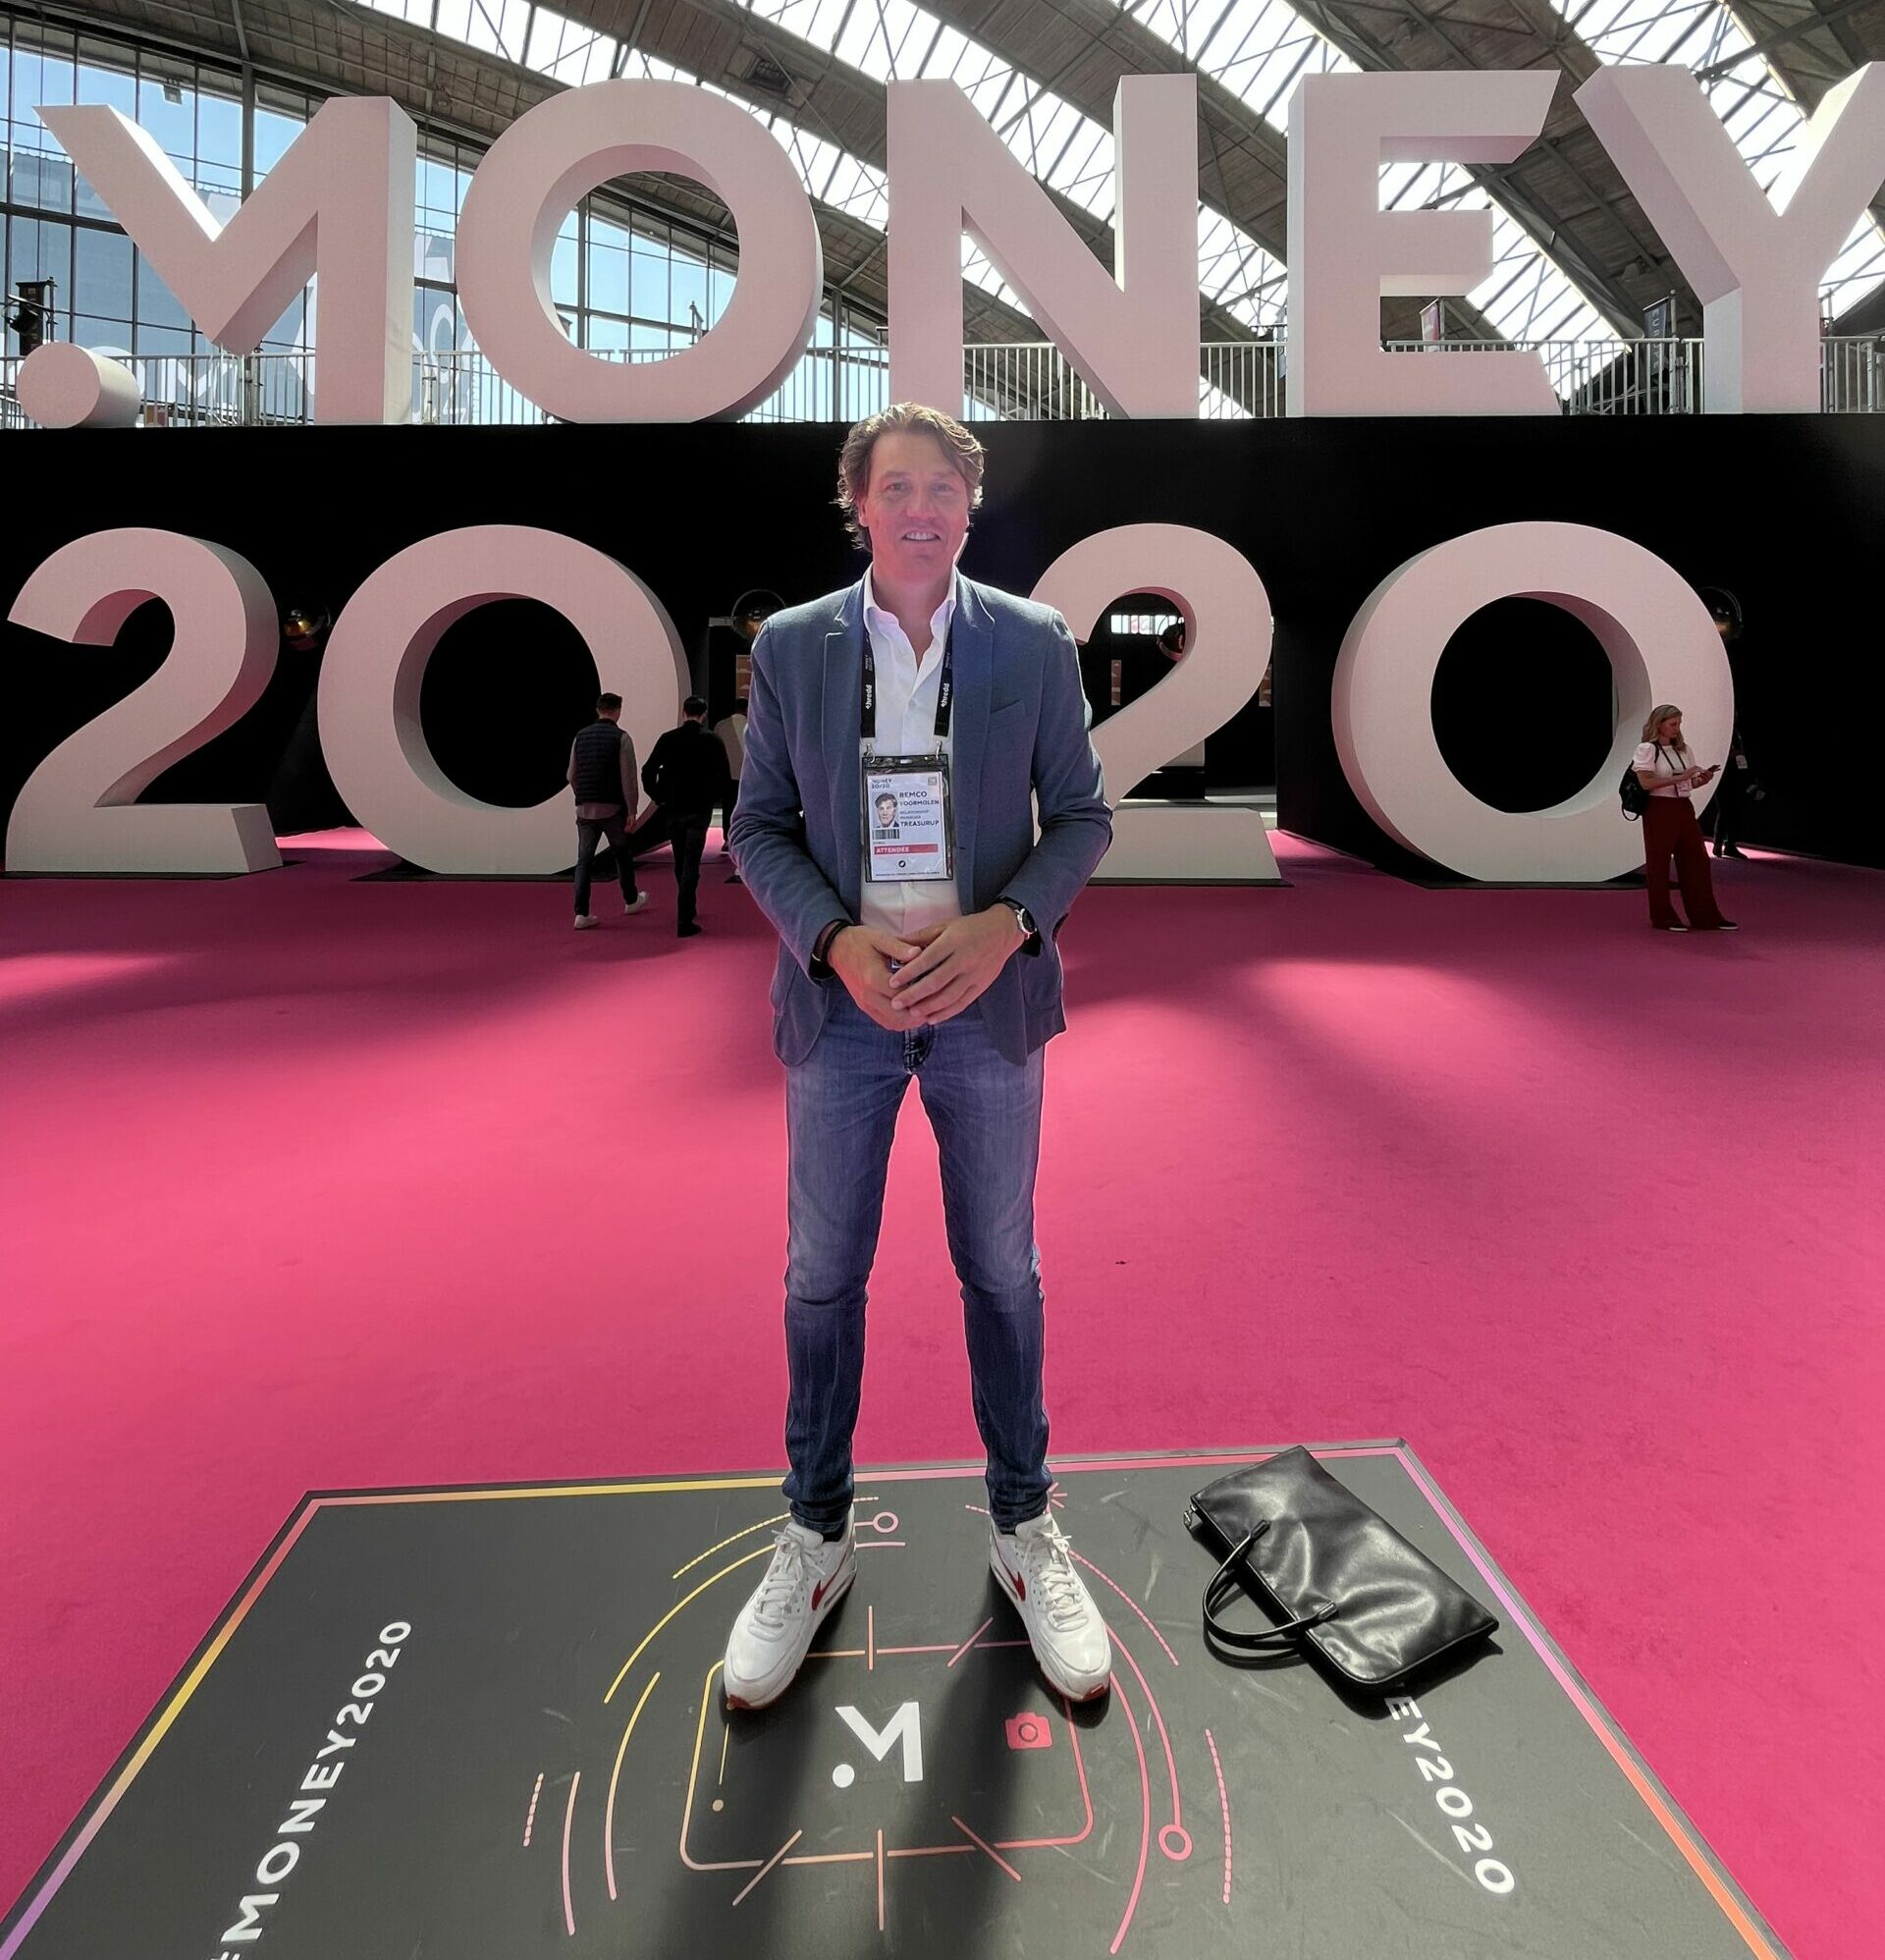 A professional photograph capturing Remco, the Relationship Manager at TreasurUp, during his visit to Money2020 2023 in Amsterdam. Remco is seen confidently engaging with event attendees, representing TreasurUp and fostering valuable connections within the finance and fintech industry.